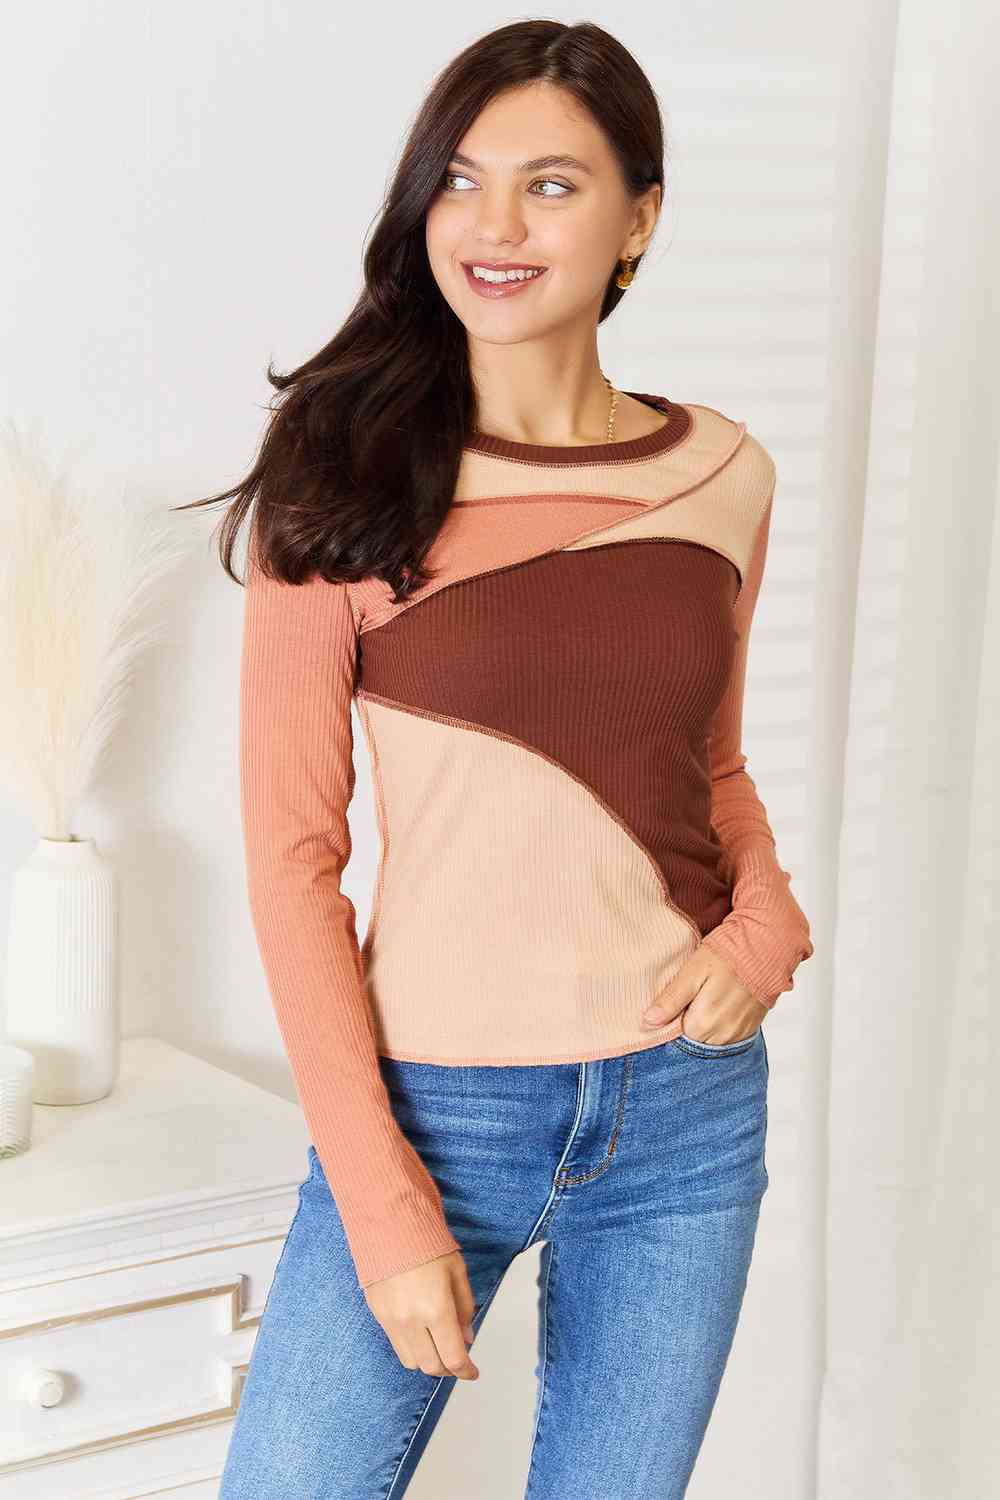 Double Take Color Block Exposed Seam Long Sleeve Top - Sizes S-2XL Ti Amo I love you